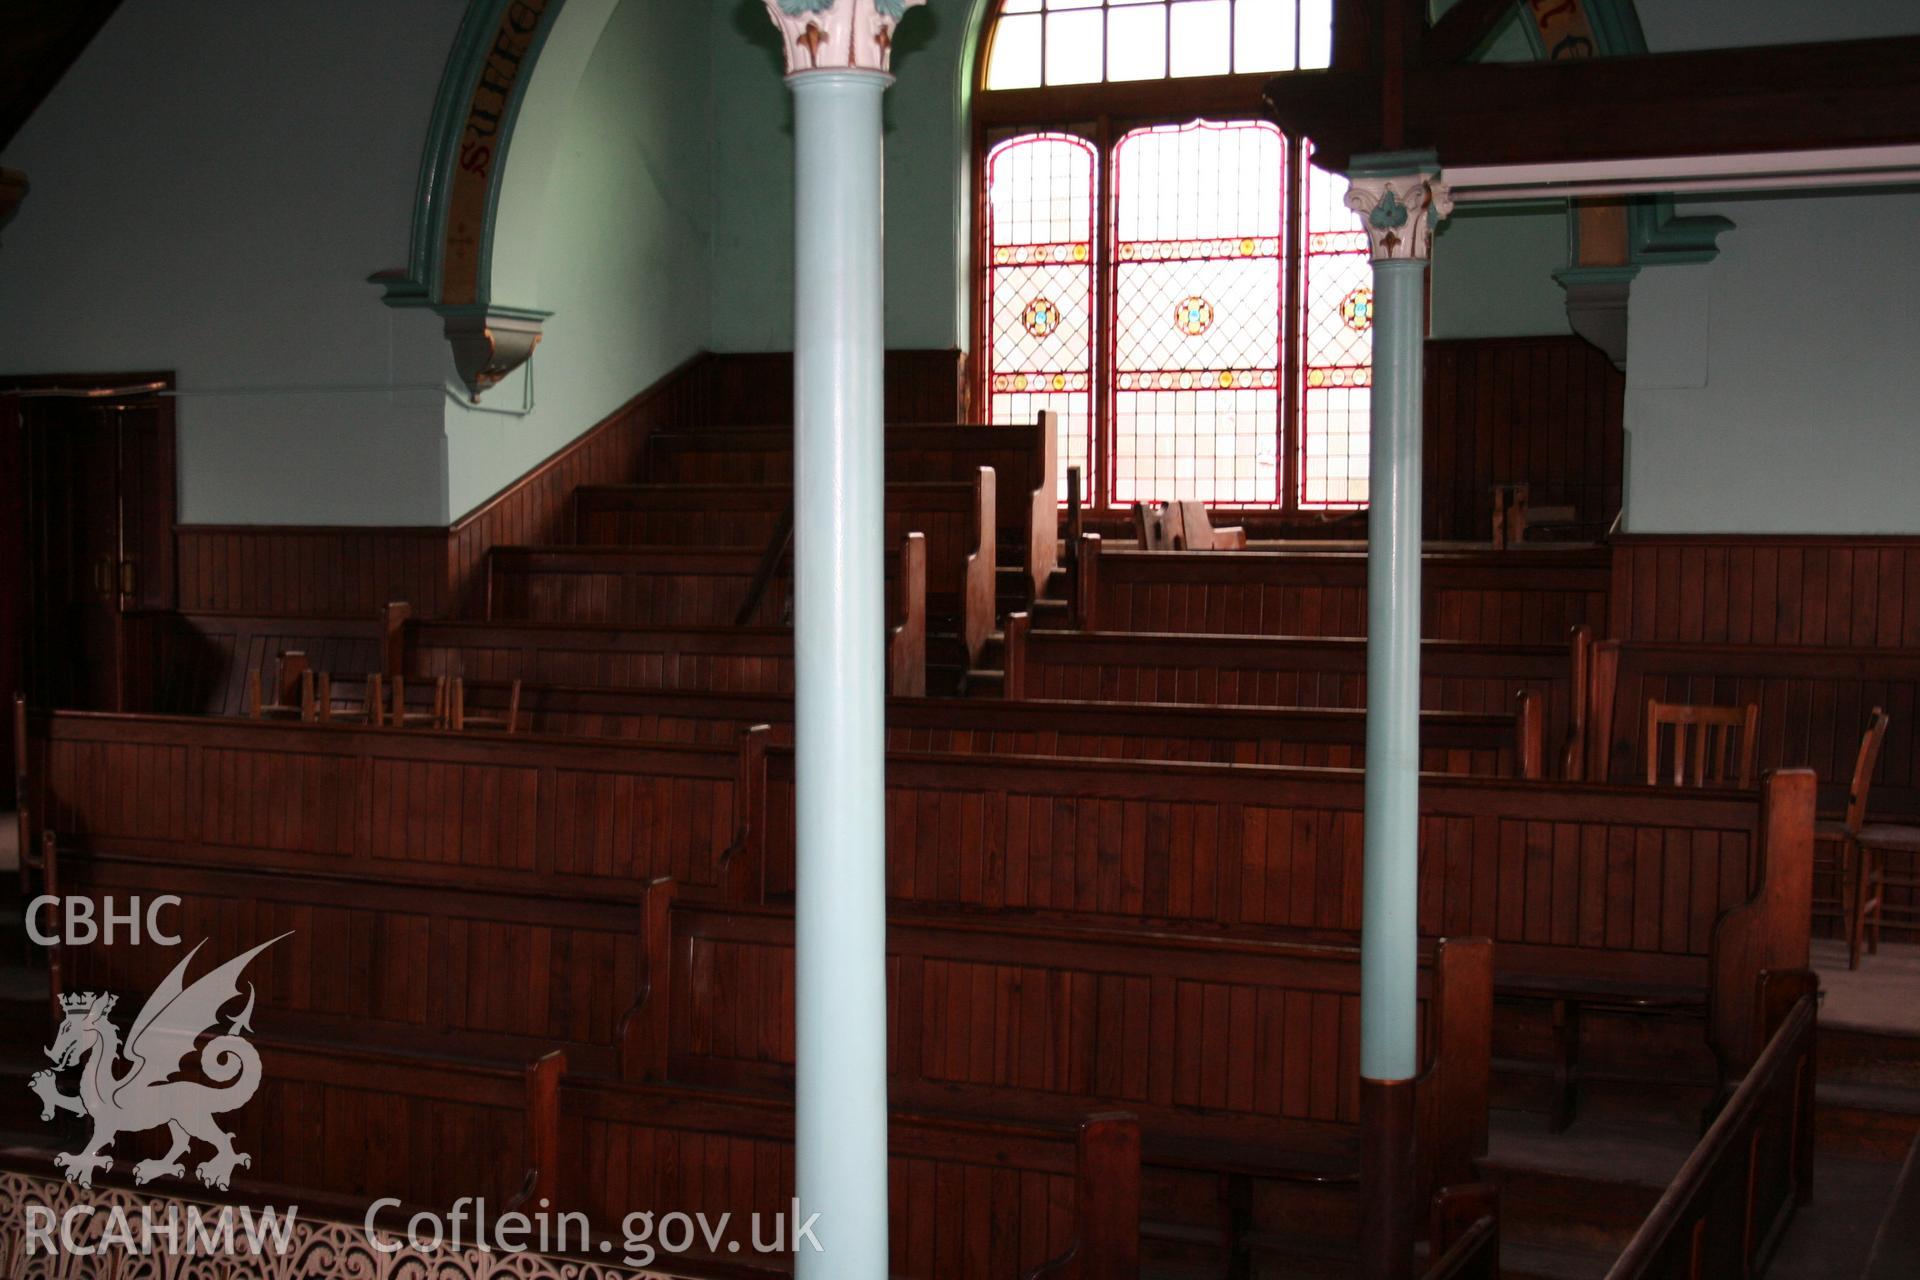 Hanbury Road baptist chapel, Bargoed, digital colour photograph showing interior - pews, received in the course of Emergency Recording case ref no RCS2/1/2247.